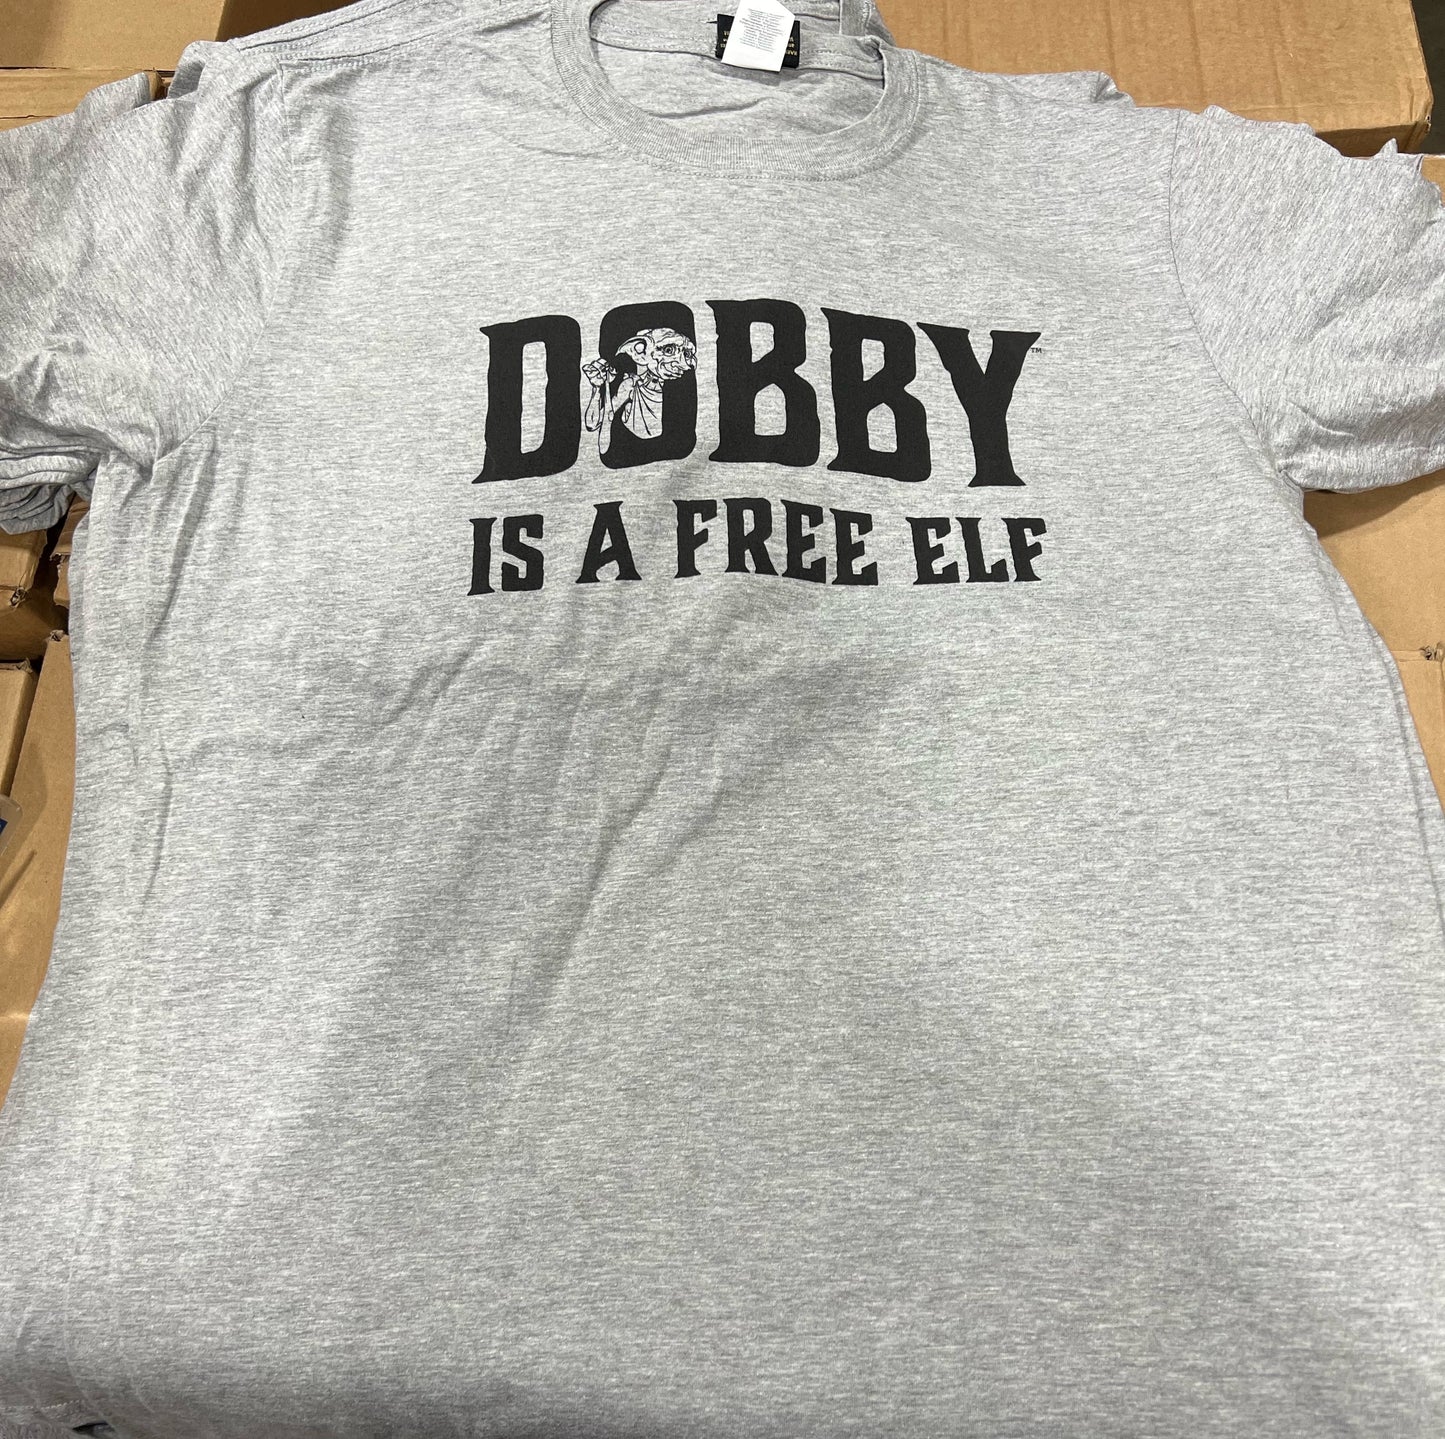 – and a the Se CineConcerts t-shirt is free of Potter Dobby elf\